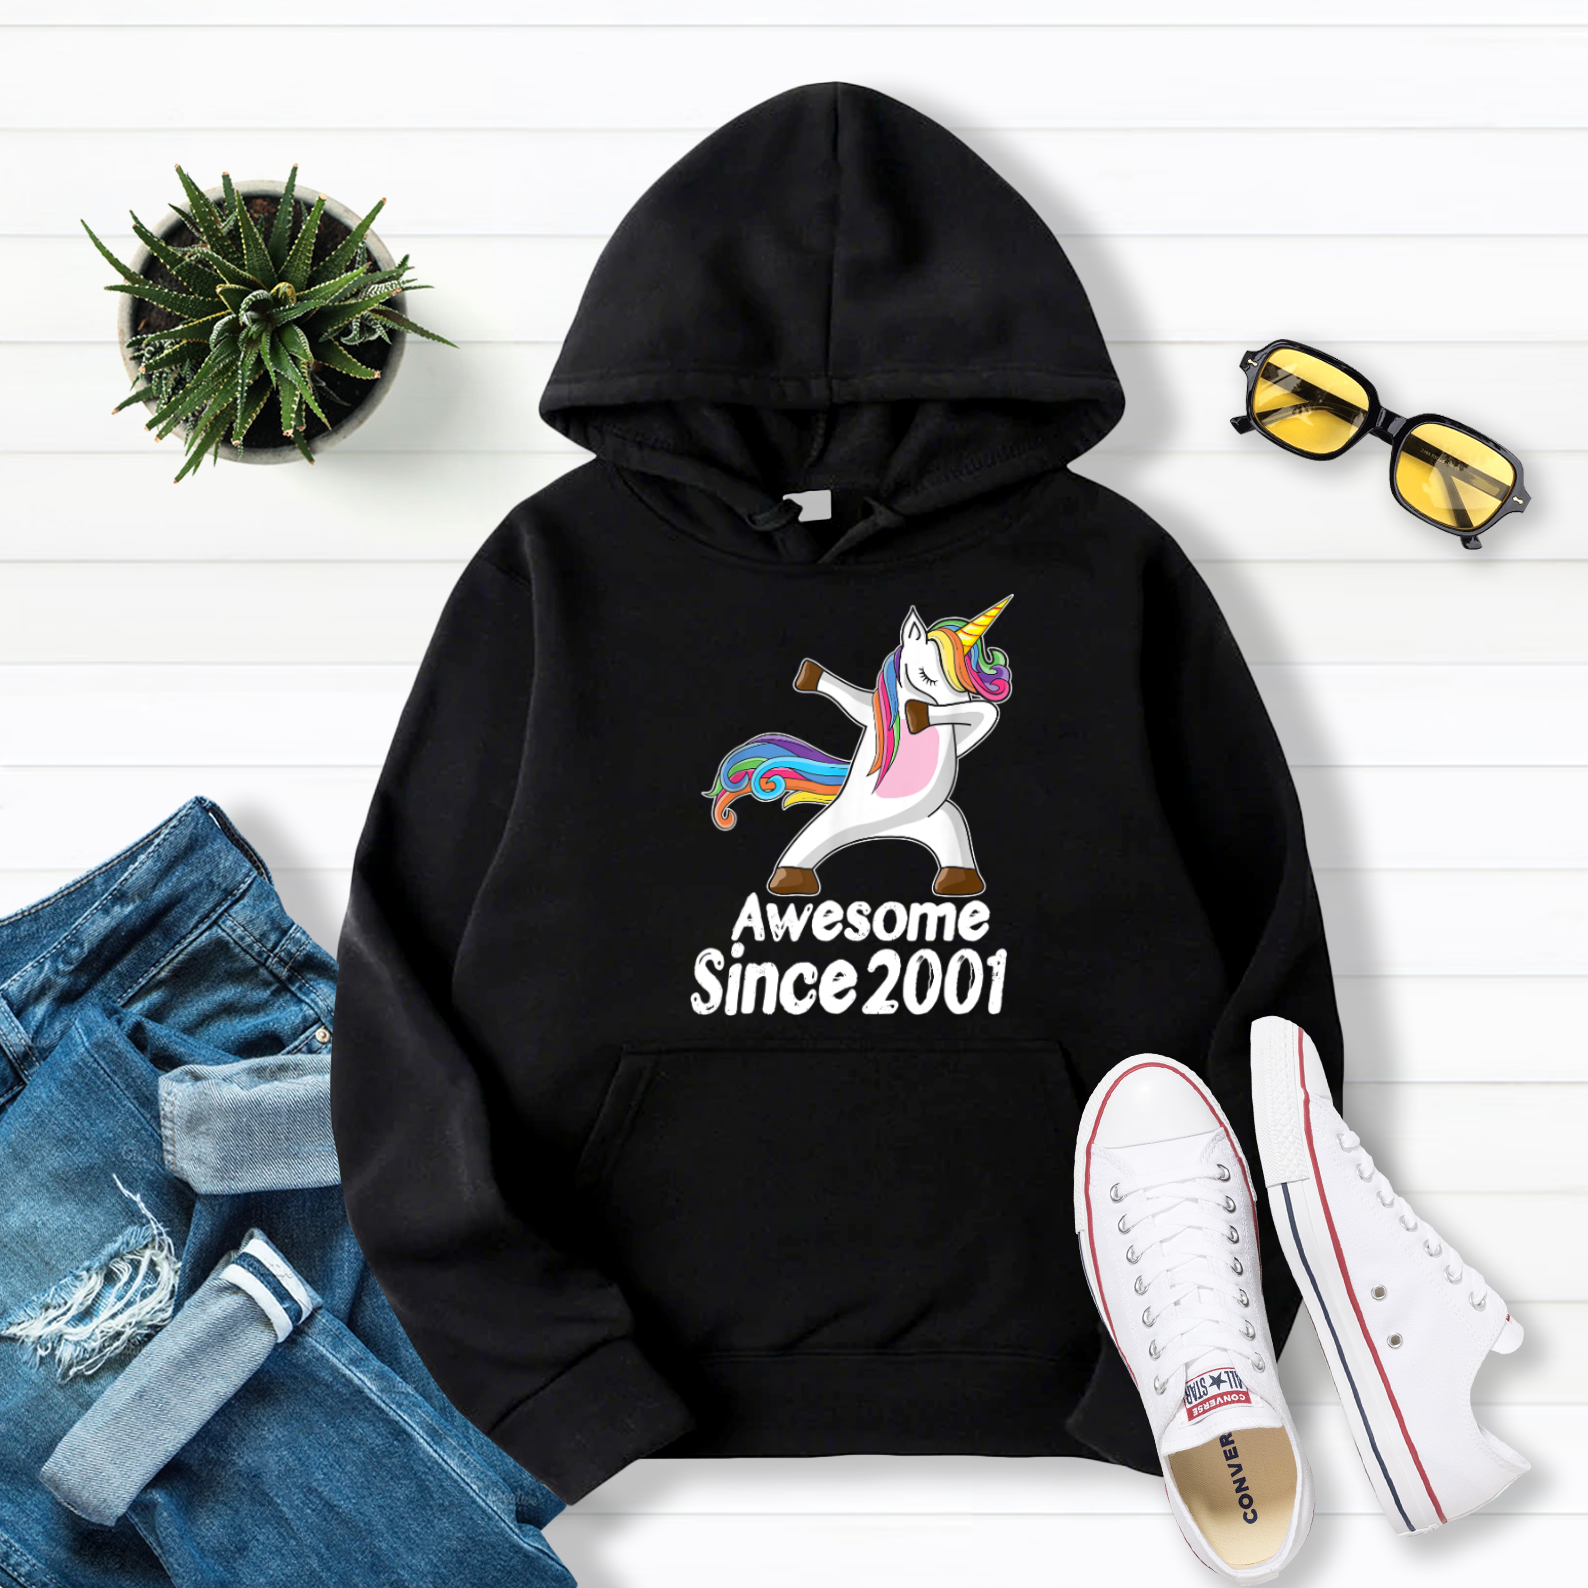 18th Birthday Gift Awesome Since 2001 Unicorn Dabbing Pullover Hoodie Black S-5XL